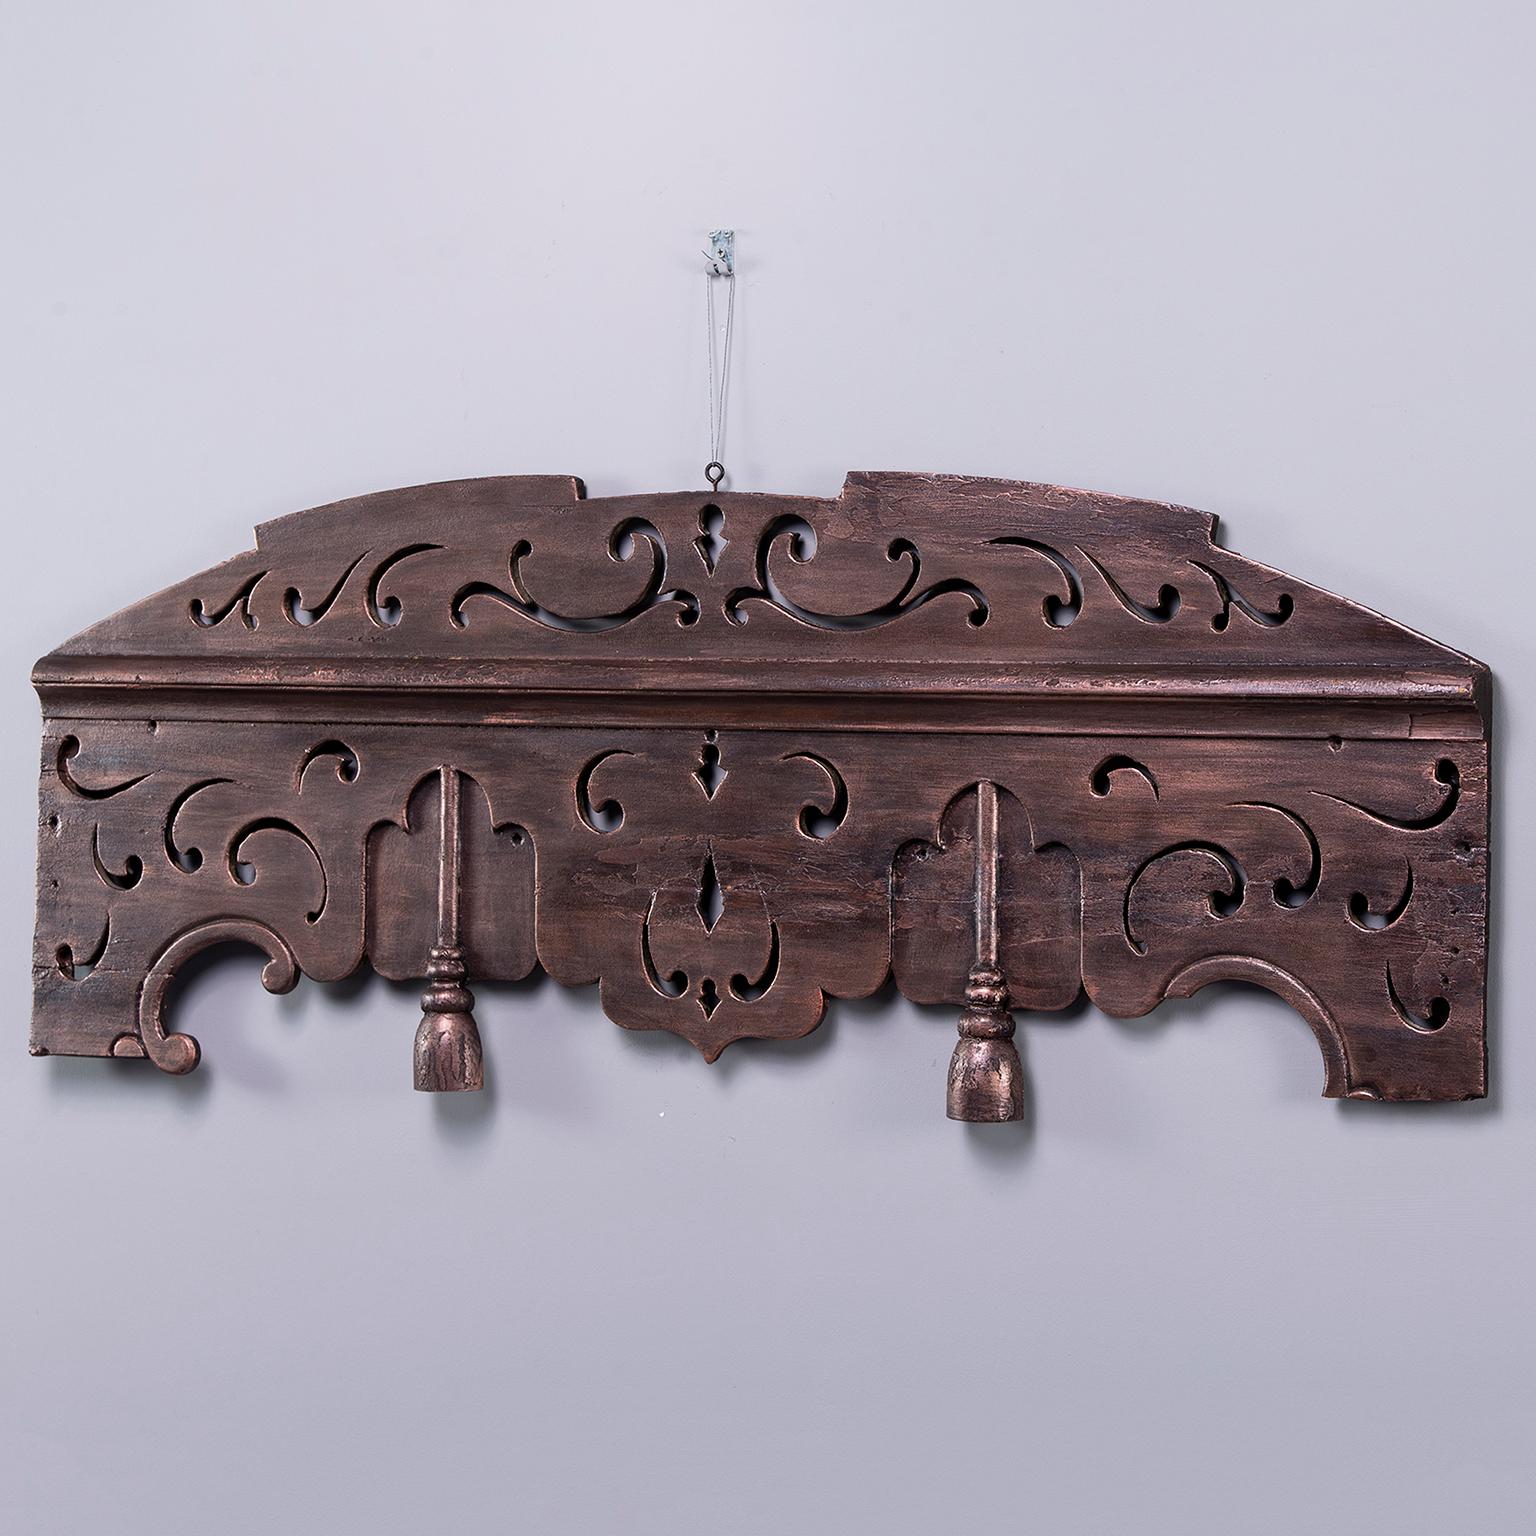 Carved wood over-mantel (fireplace) piece is just under 50” long with arched top and two carved tassels. Metallic bronze color painted finish, circa 1910. Unknown maker. Found in Belgium. Three available. Sold and priced individually.